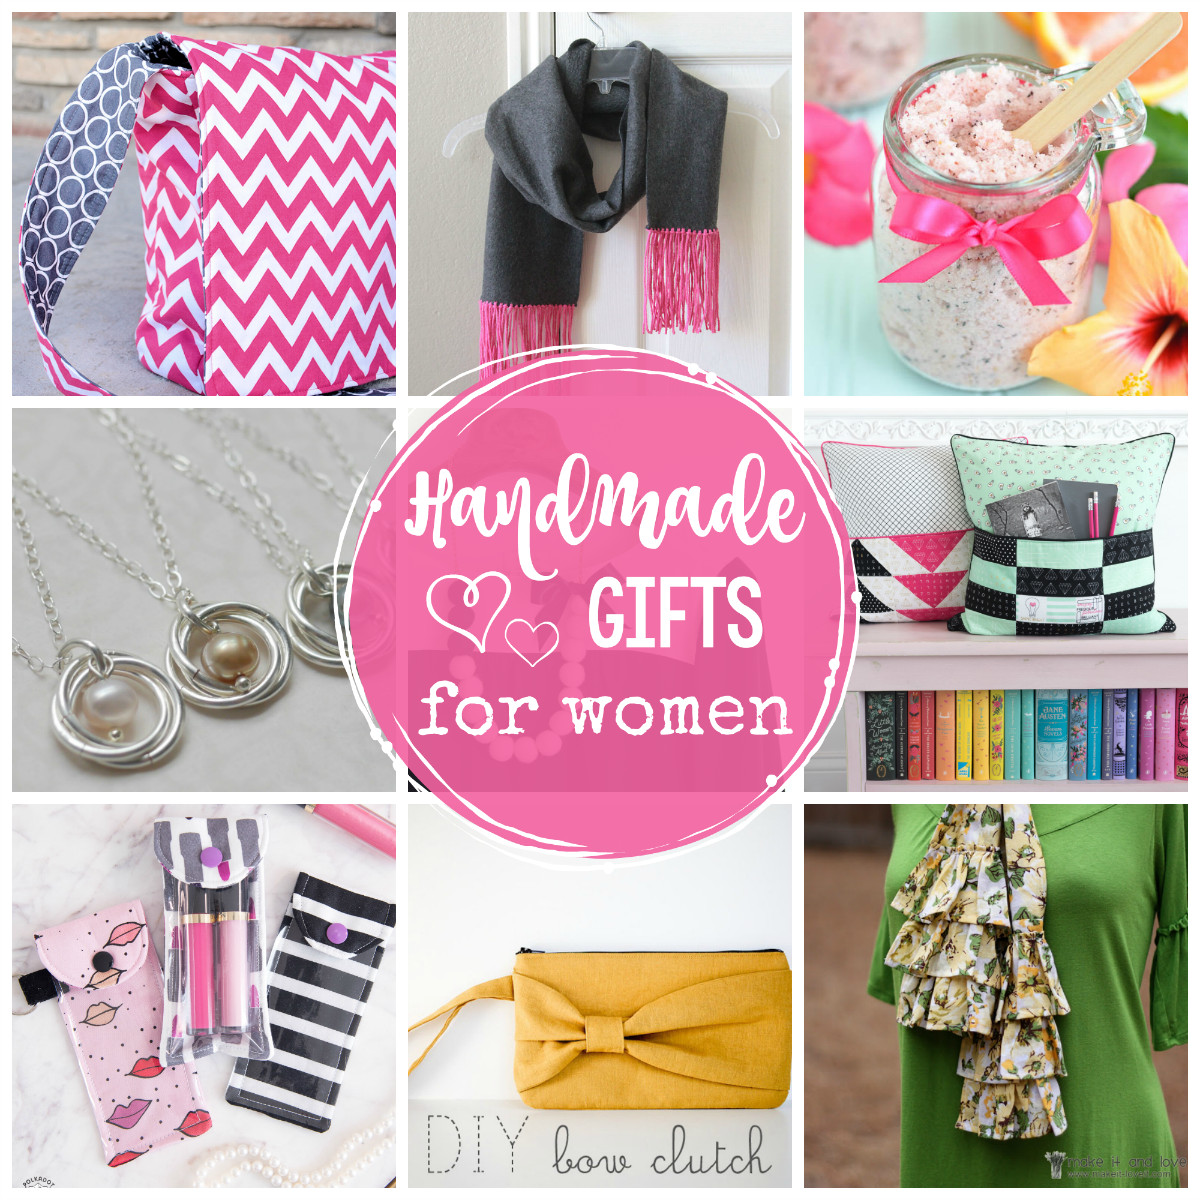 DIY Christmas Gifts For Women
 25 Great Handmade Gifts for Women Crazy Little Projects